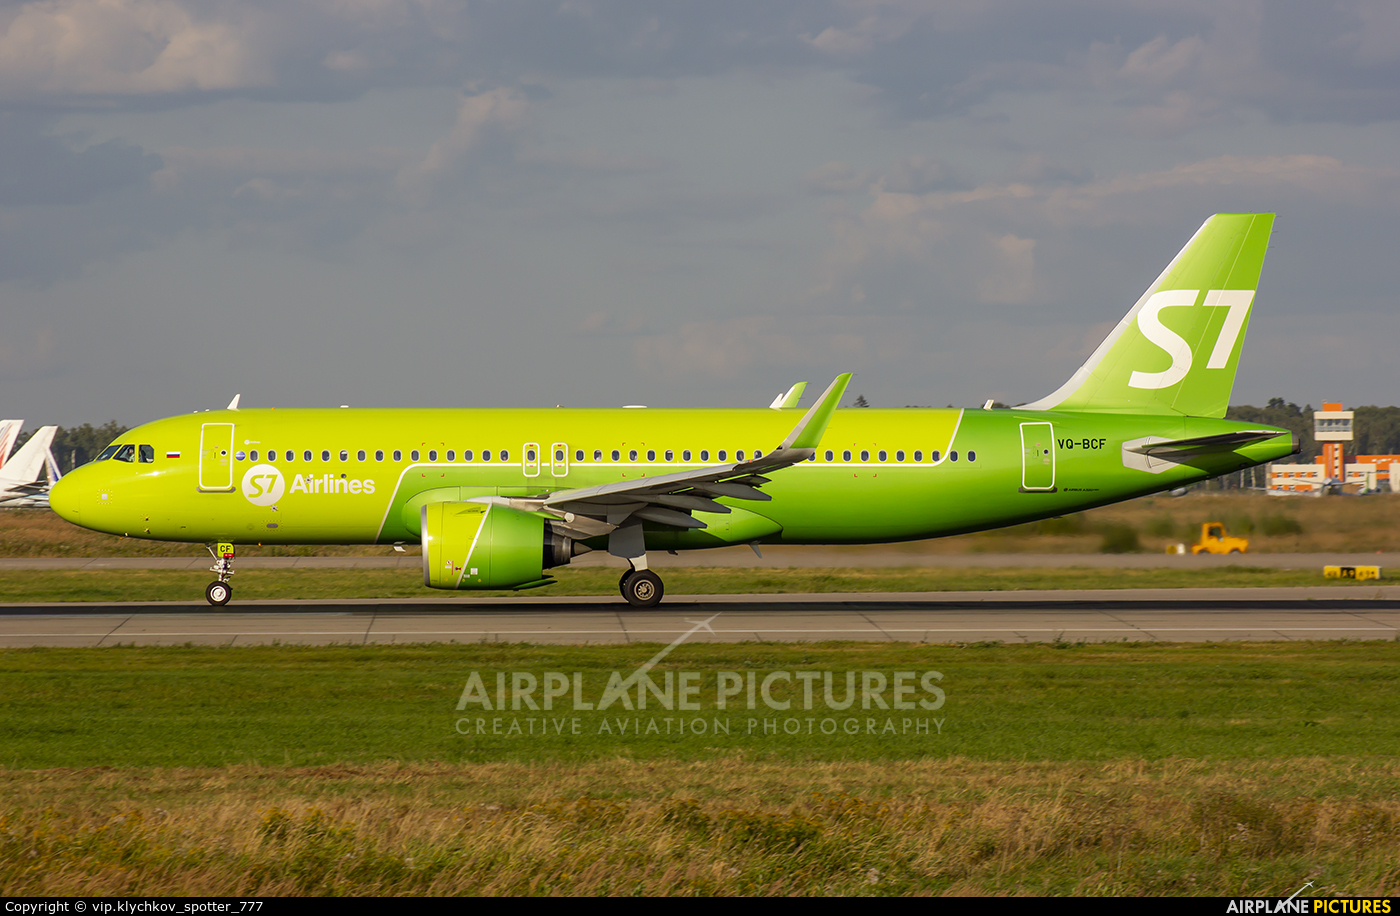 S7 Airlines VQ-BCF aircraft at Moscow - Domodedovo